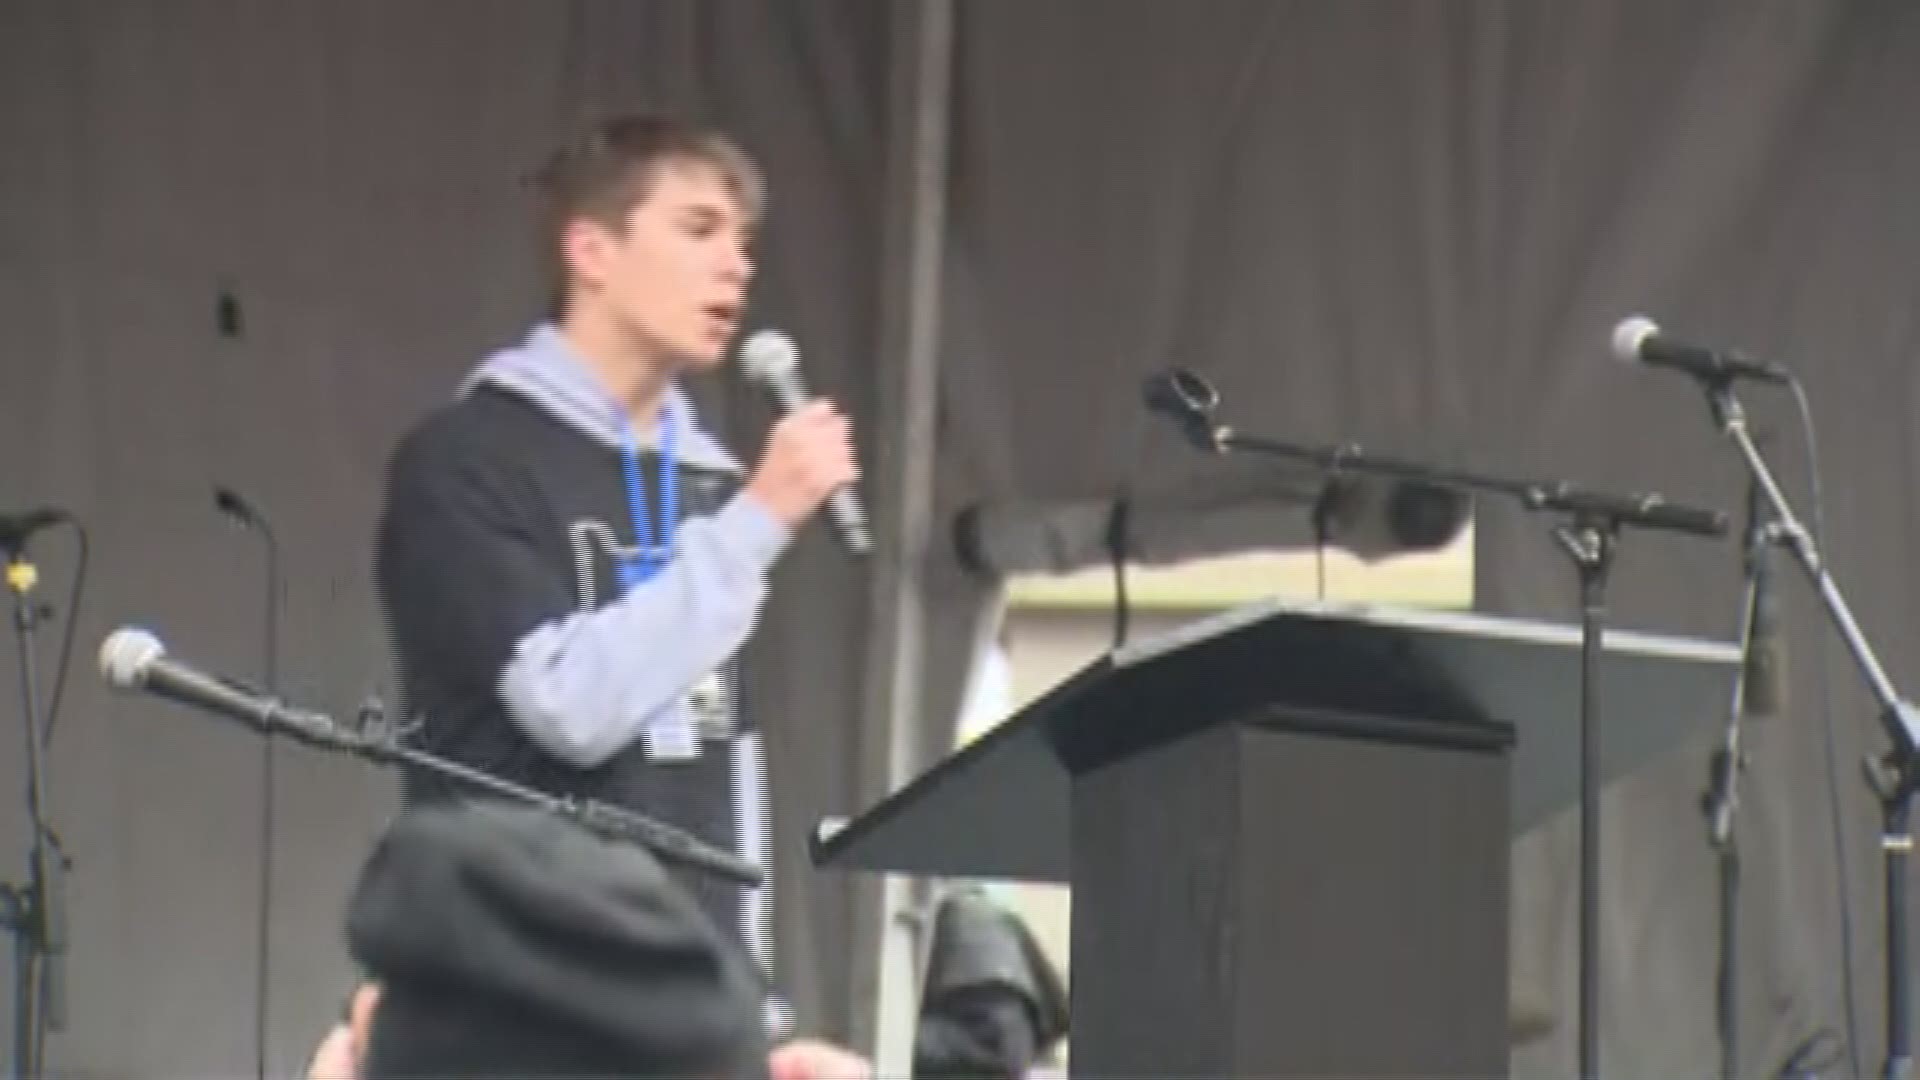 Student organizer Finn Jacobson calls out the National Rifle Association and President Donald Trump during a speech at Portland's March for Our Lives.